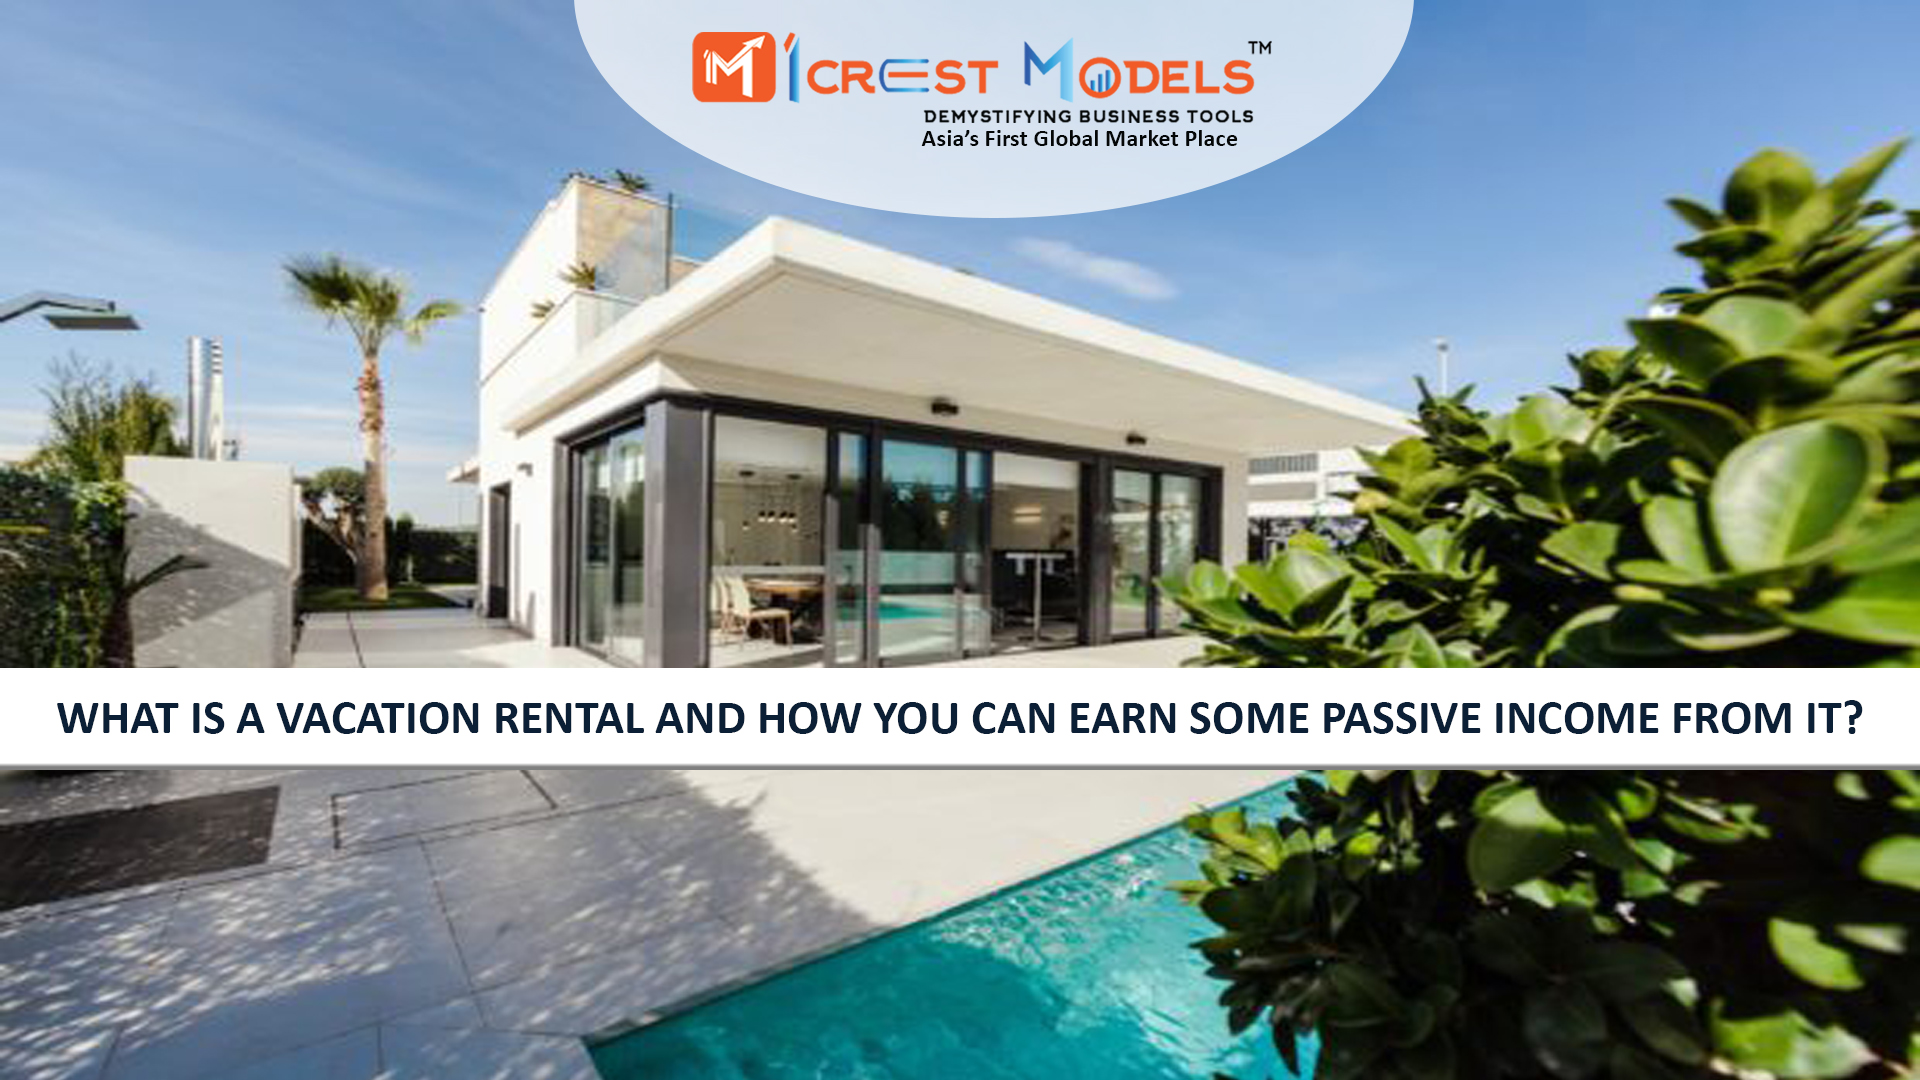 What is a vacation rental and how you can earn some passive income from it?